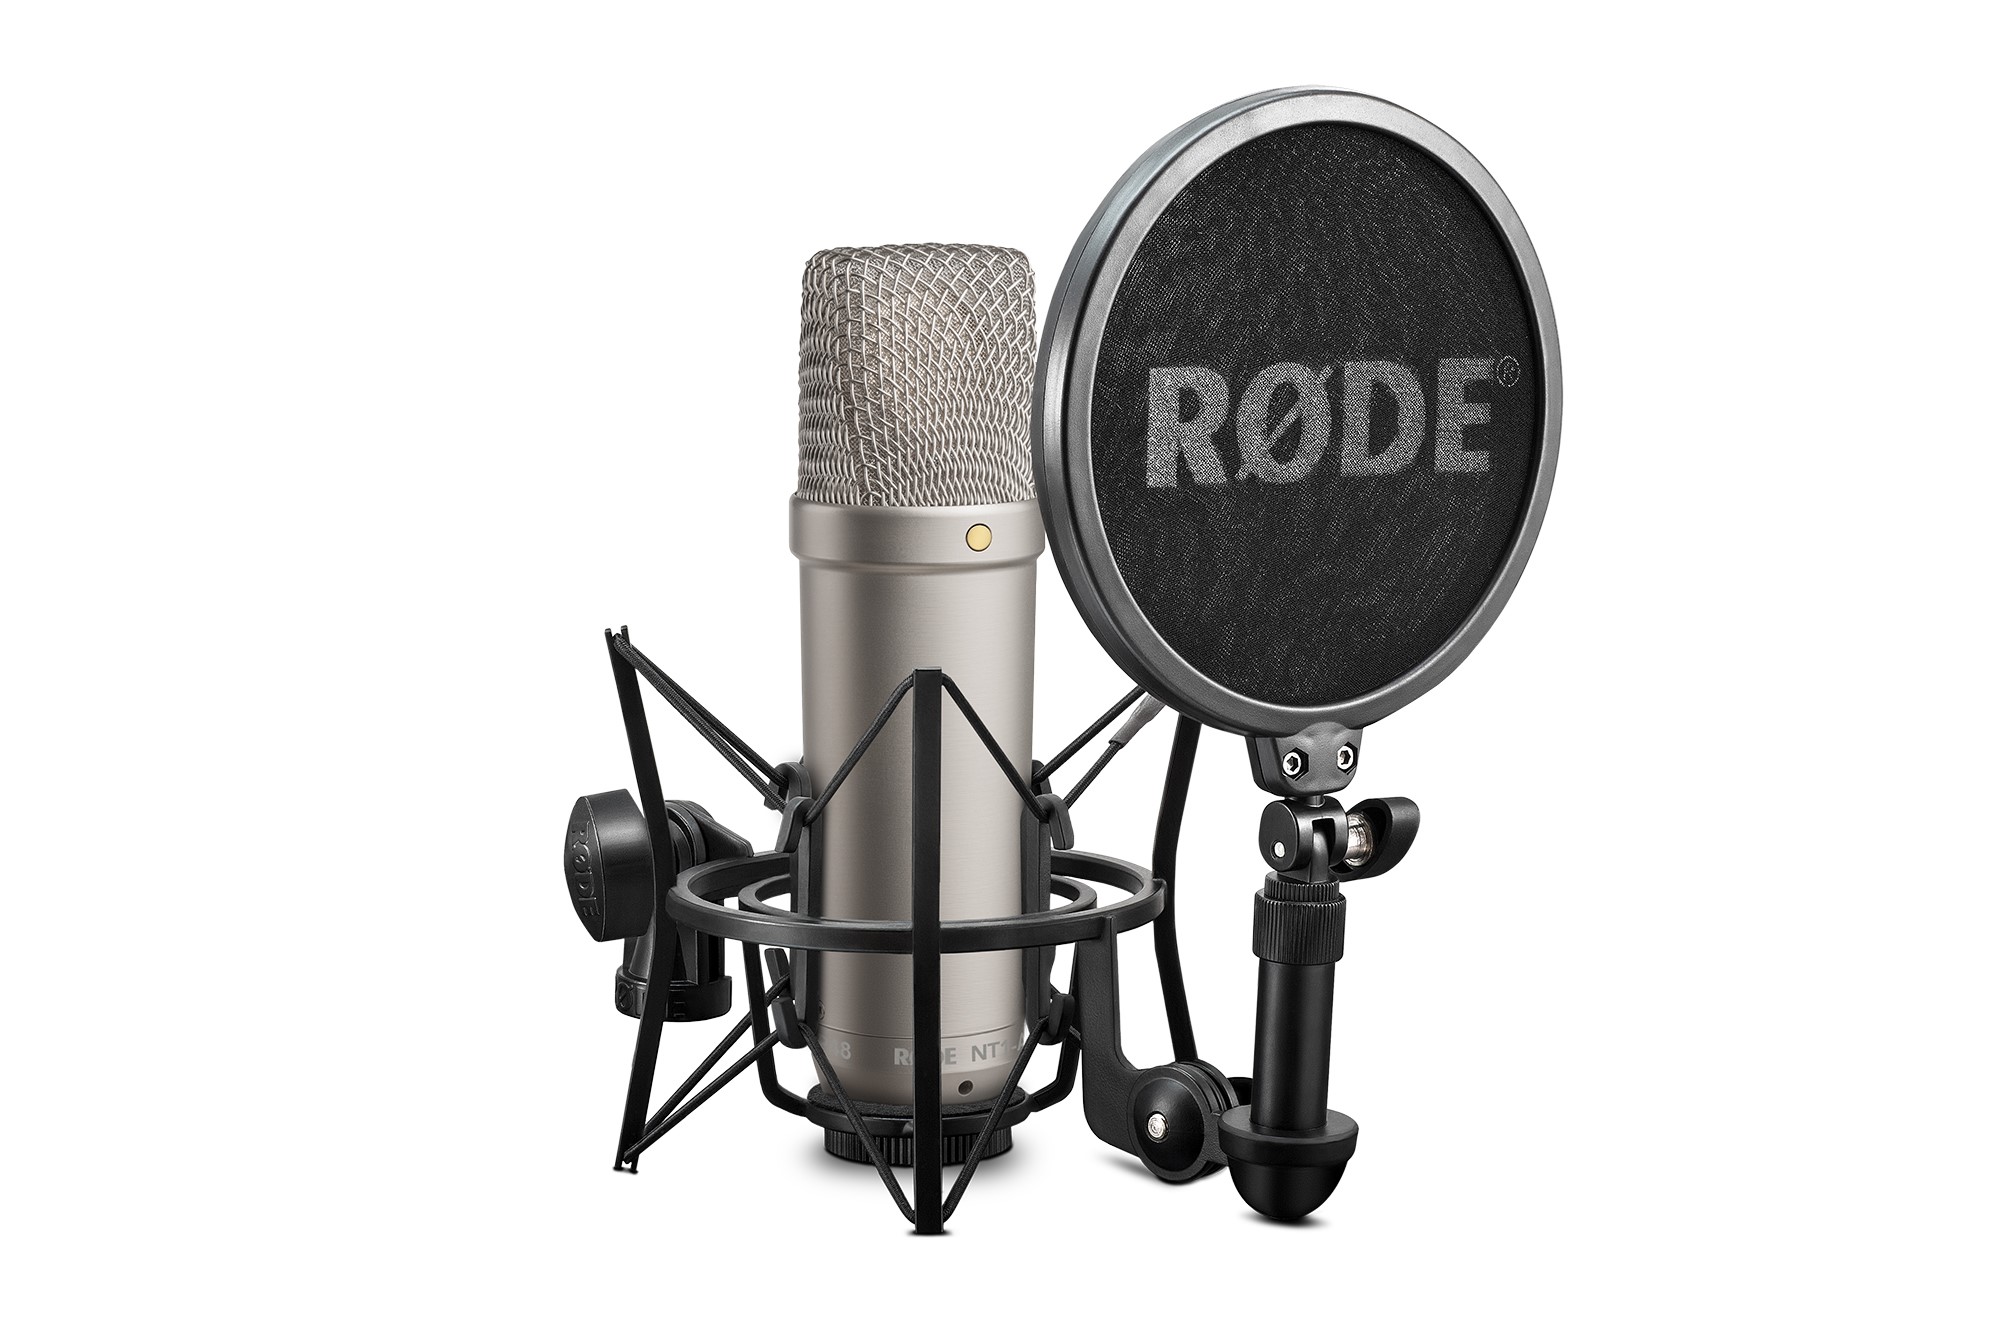 Rode NT1 5th Generation review - the studio gold standard